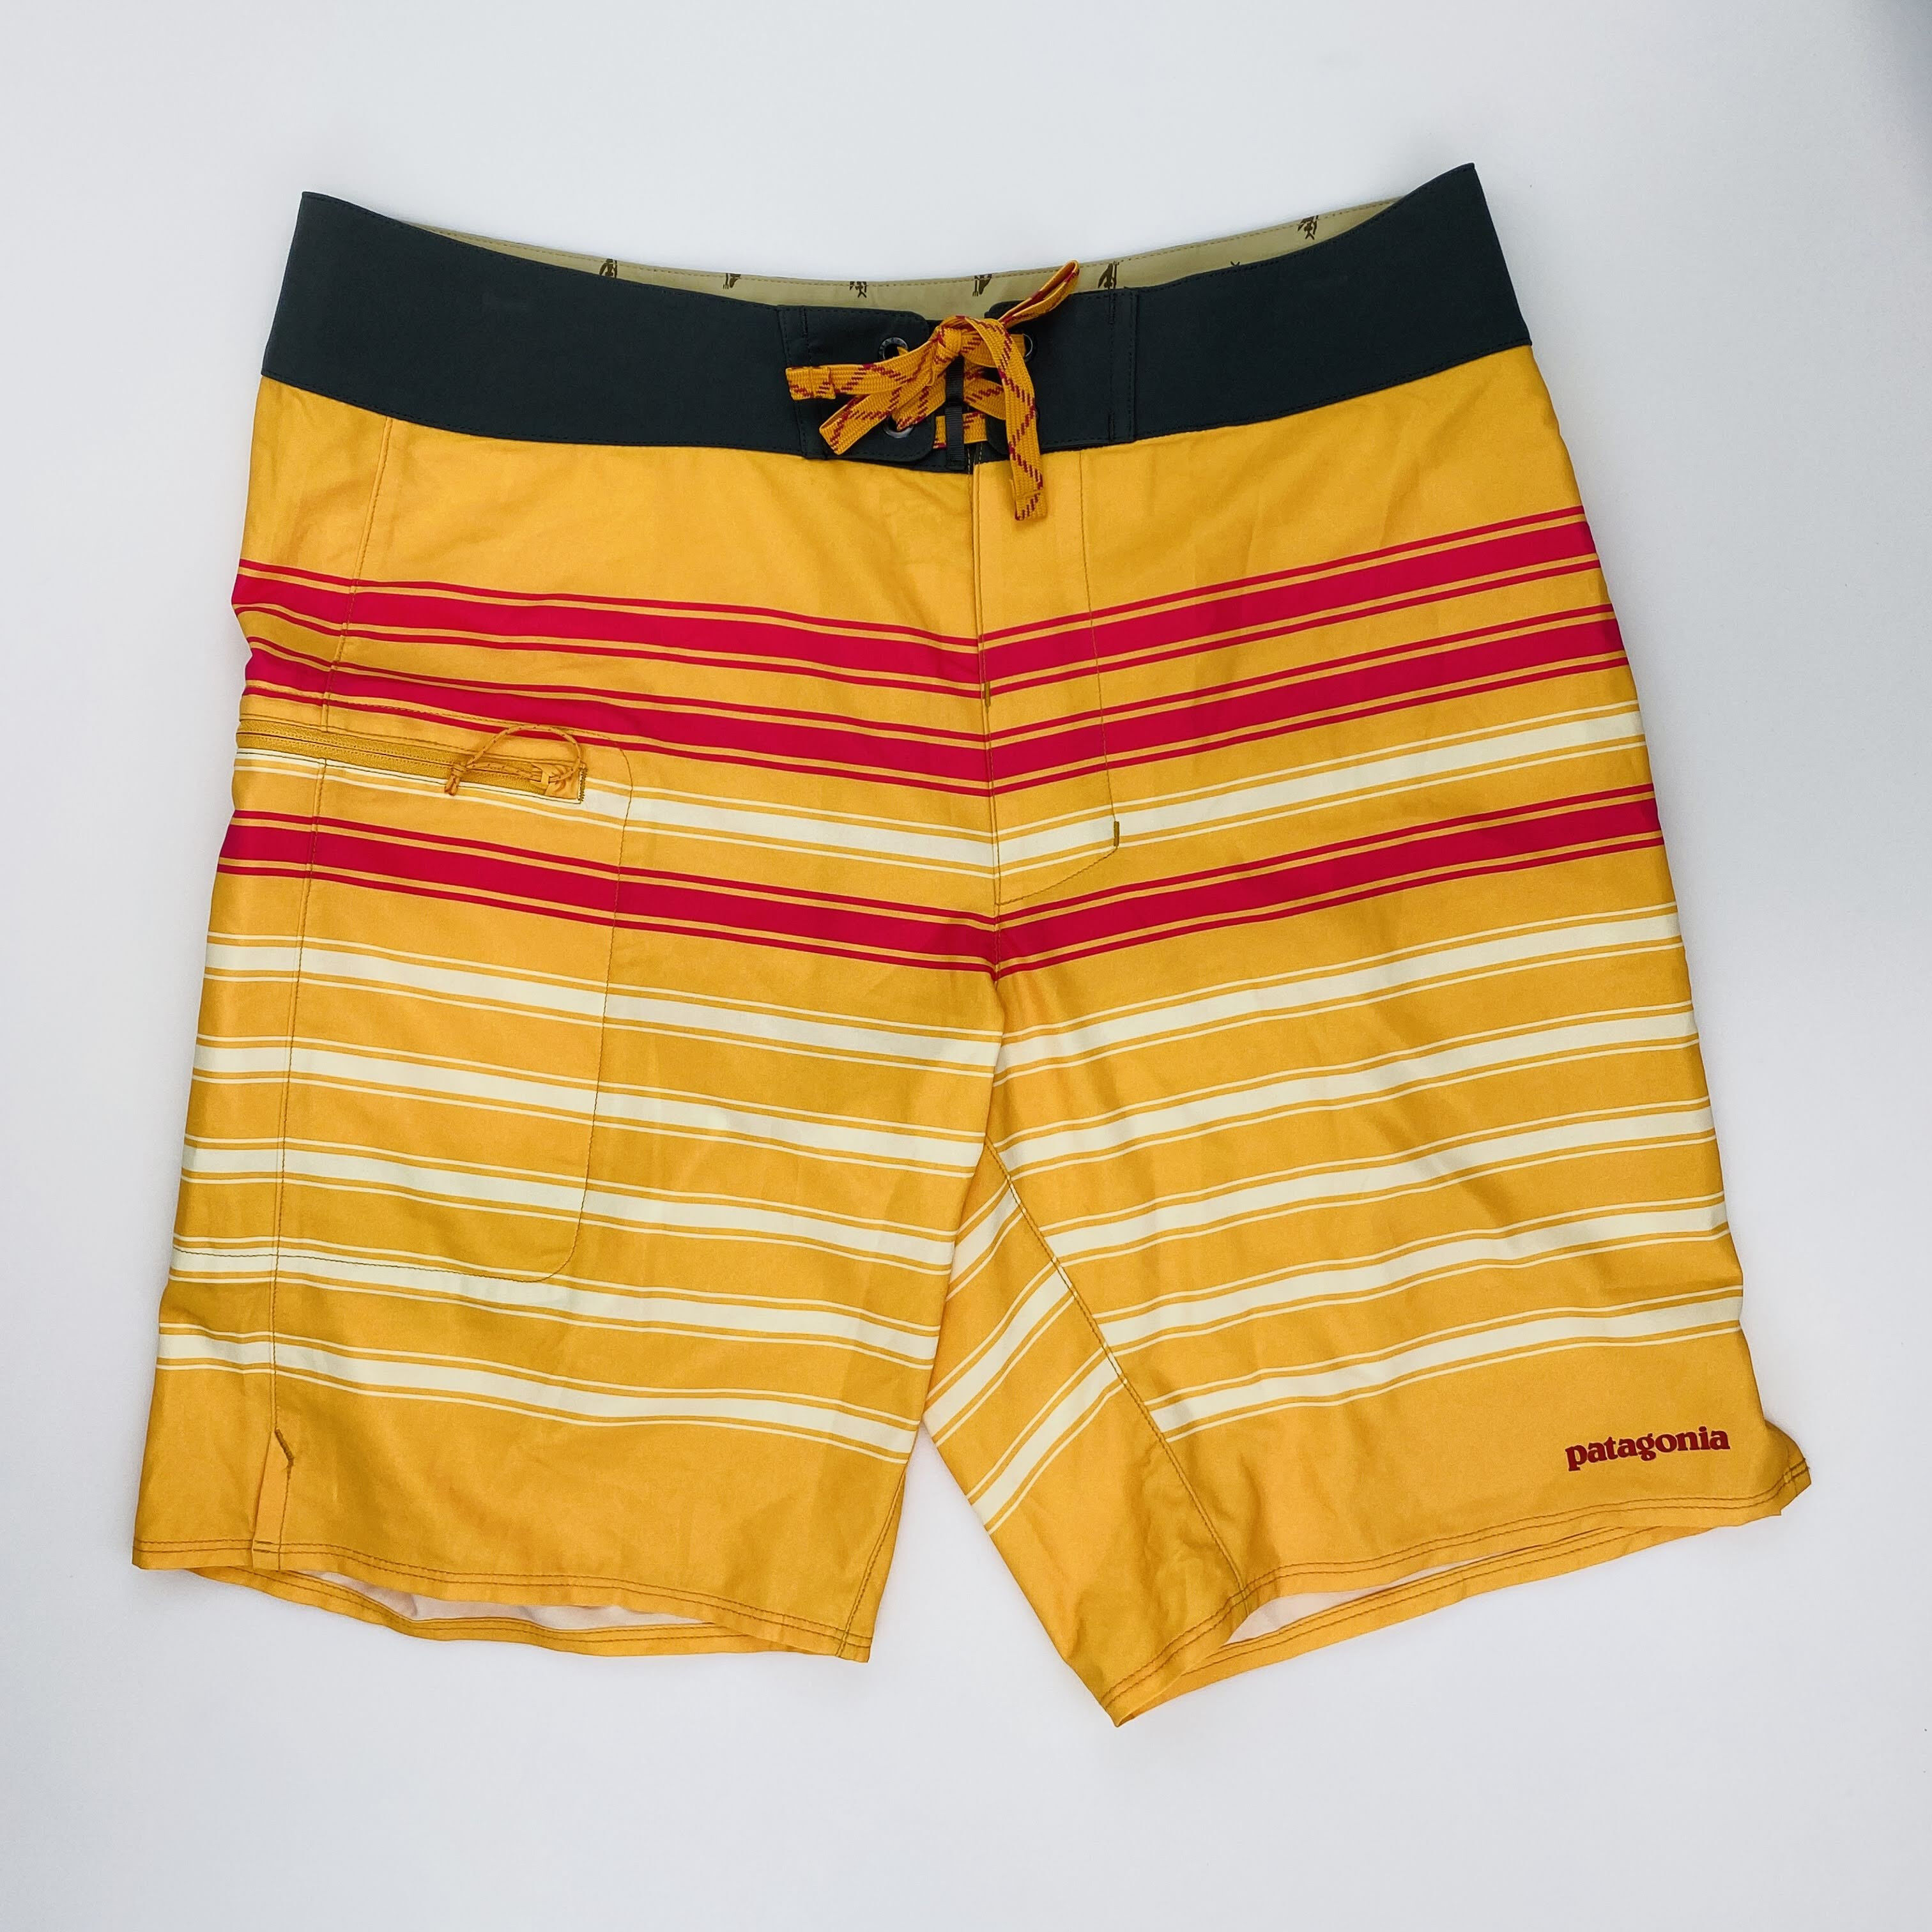 Patagonia M's Stretch Planing Boardshorts - 19 in. - Second Hand Shorts - Men's - Multicolored - 42 | Hardloop